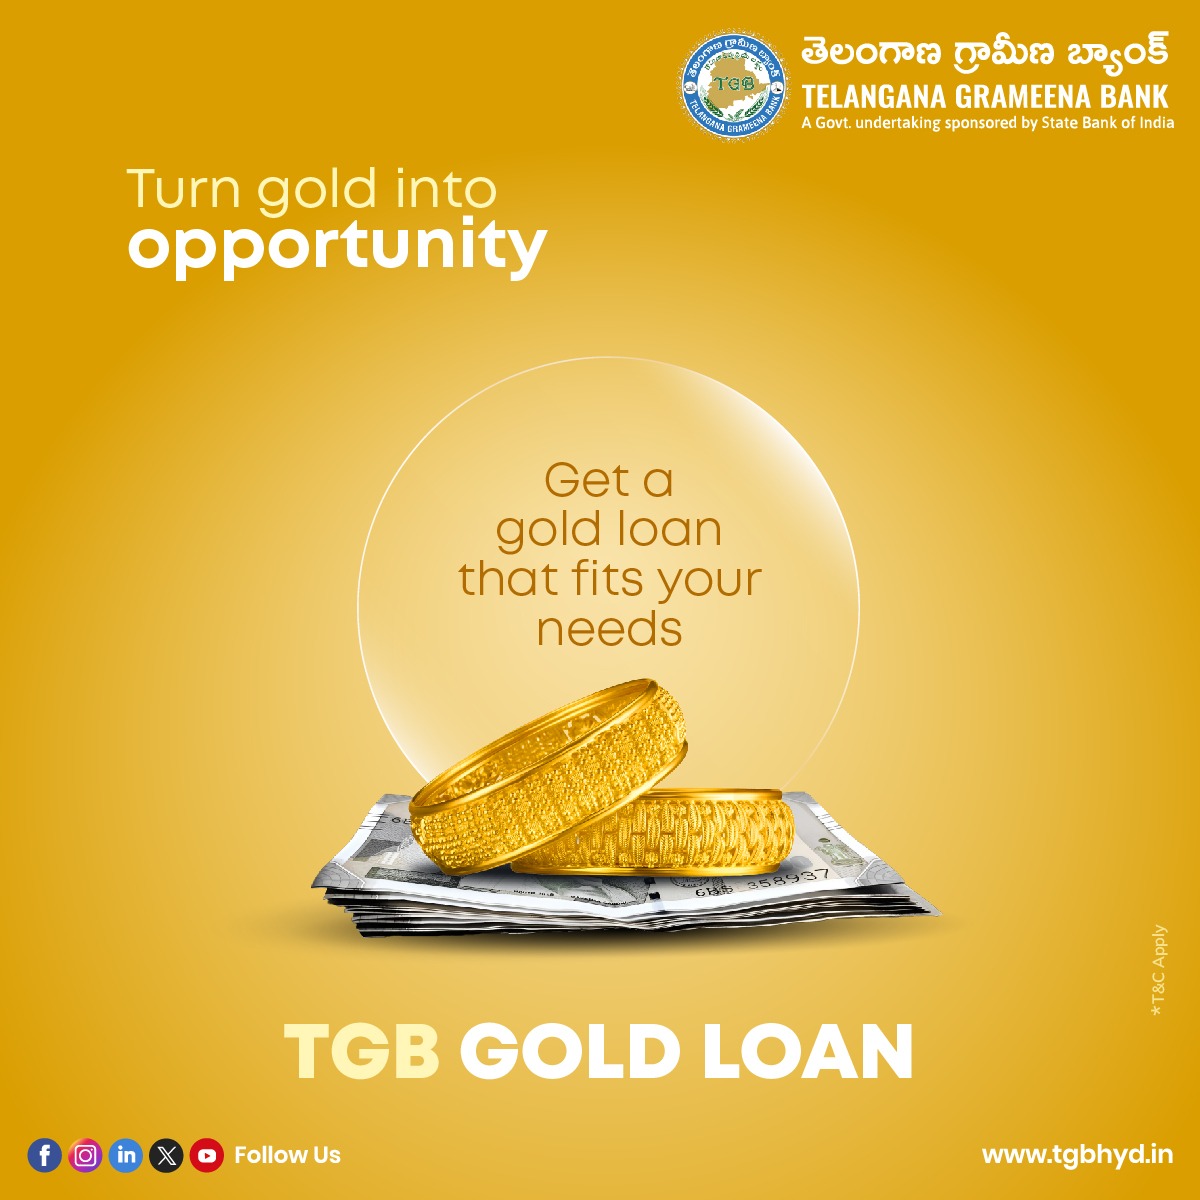 Turn your gold into cash with our competitive-interest rates on Gold Loans.

#GoldLoans #Gold #Pledge #TGBCares #TGBTalks #SBI #TGB #GoldBangles #Jewellery #JL